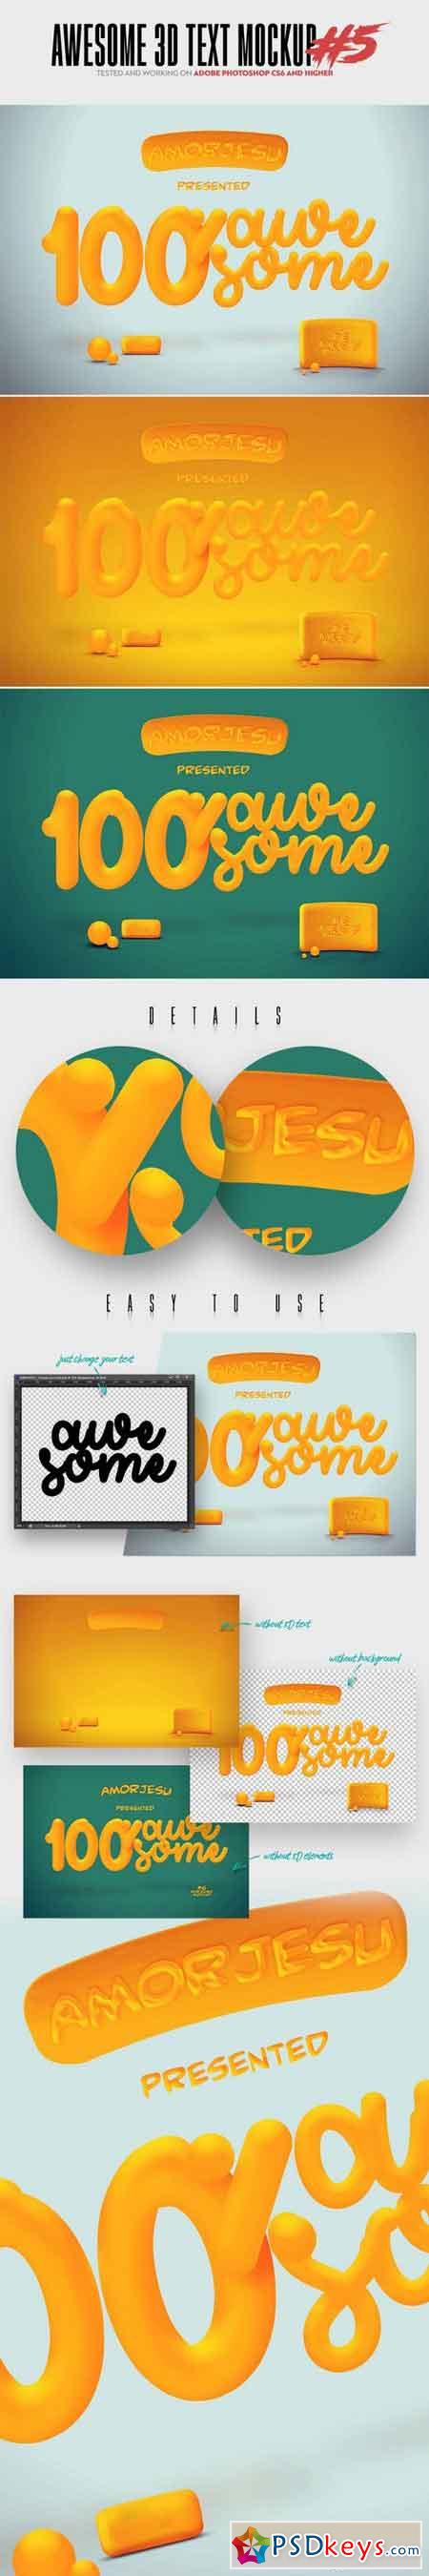 05 Awesome 3D Text Mockup - Ps CS6+ 000090